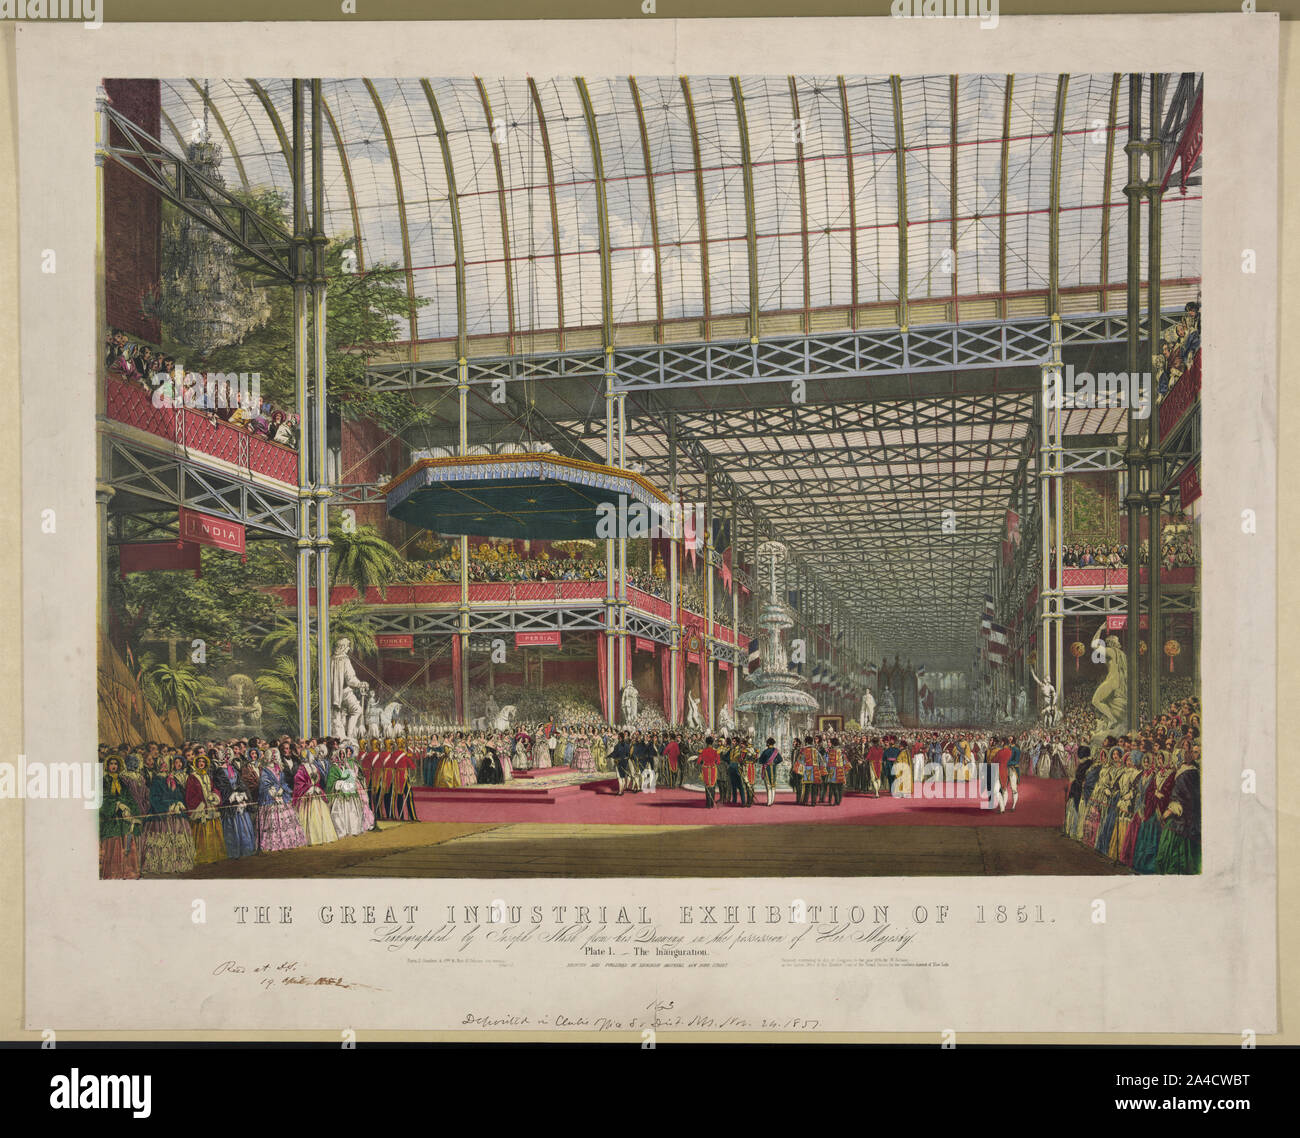 The  great industrial exhibition of 1851. Plate 1. The inauguration Stock Photo